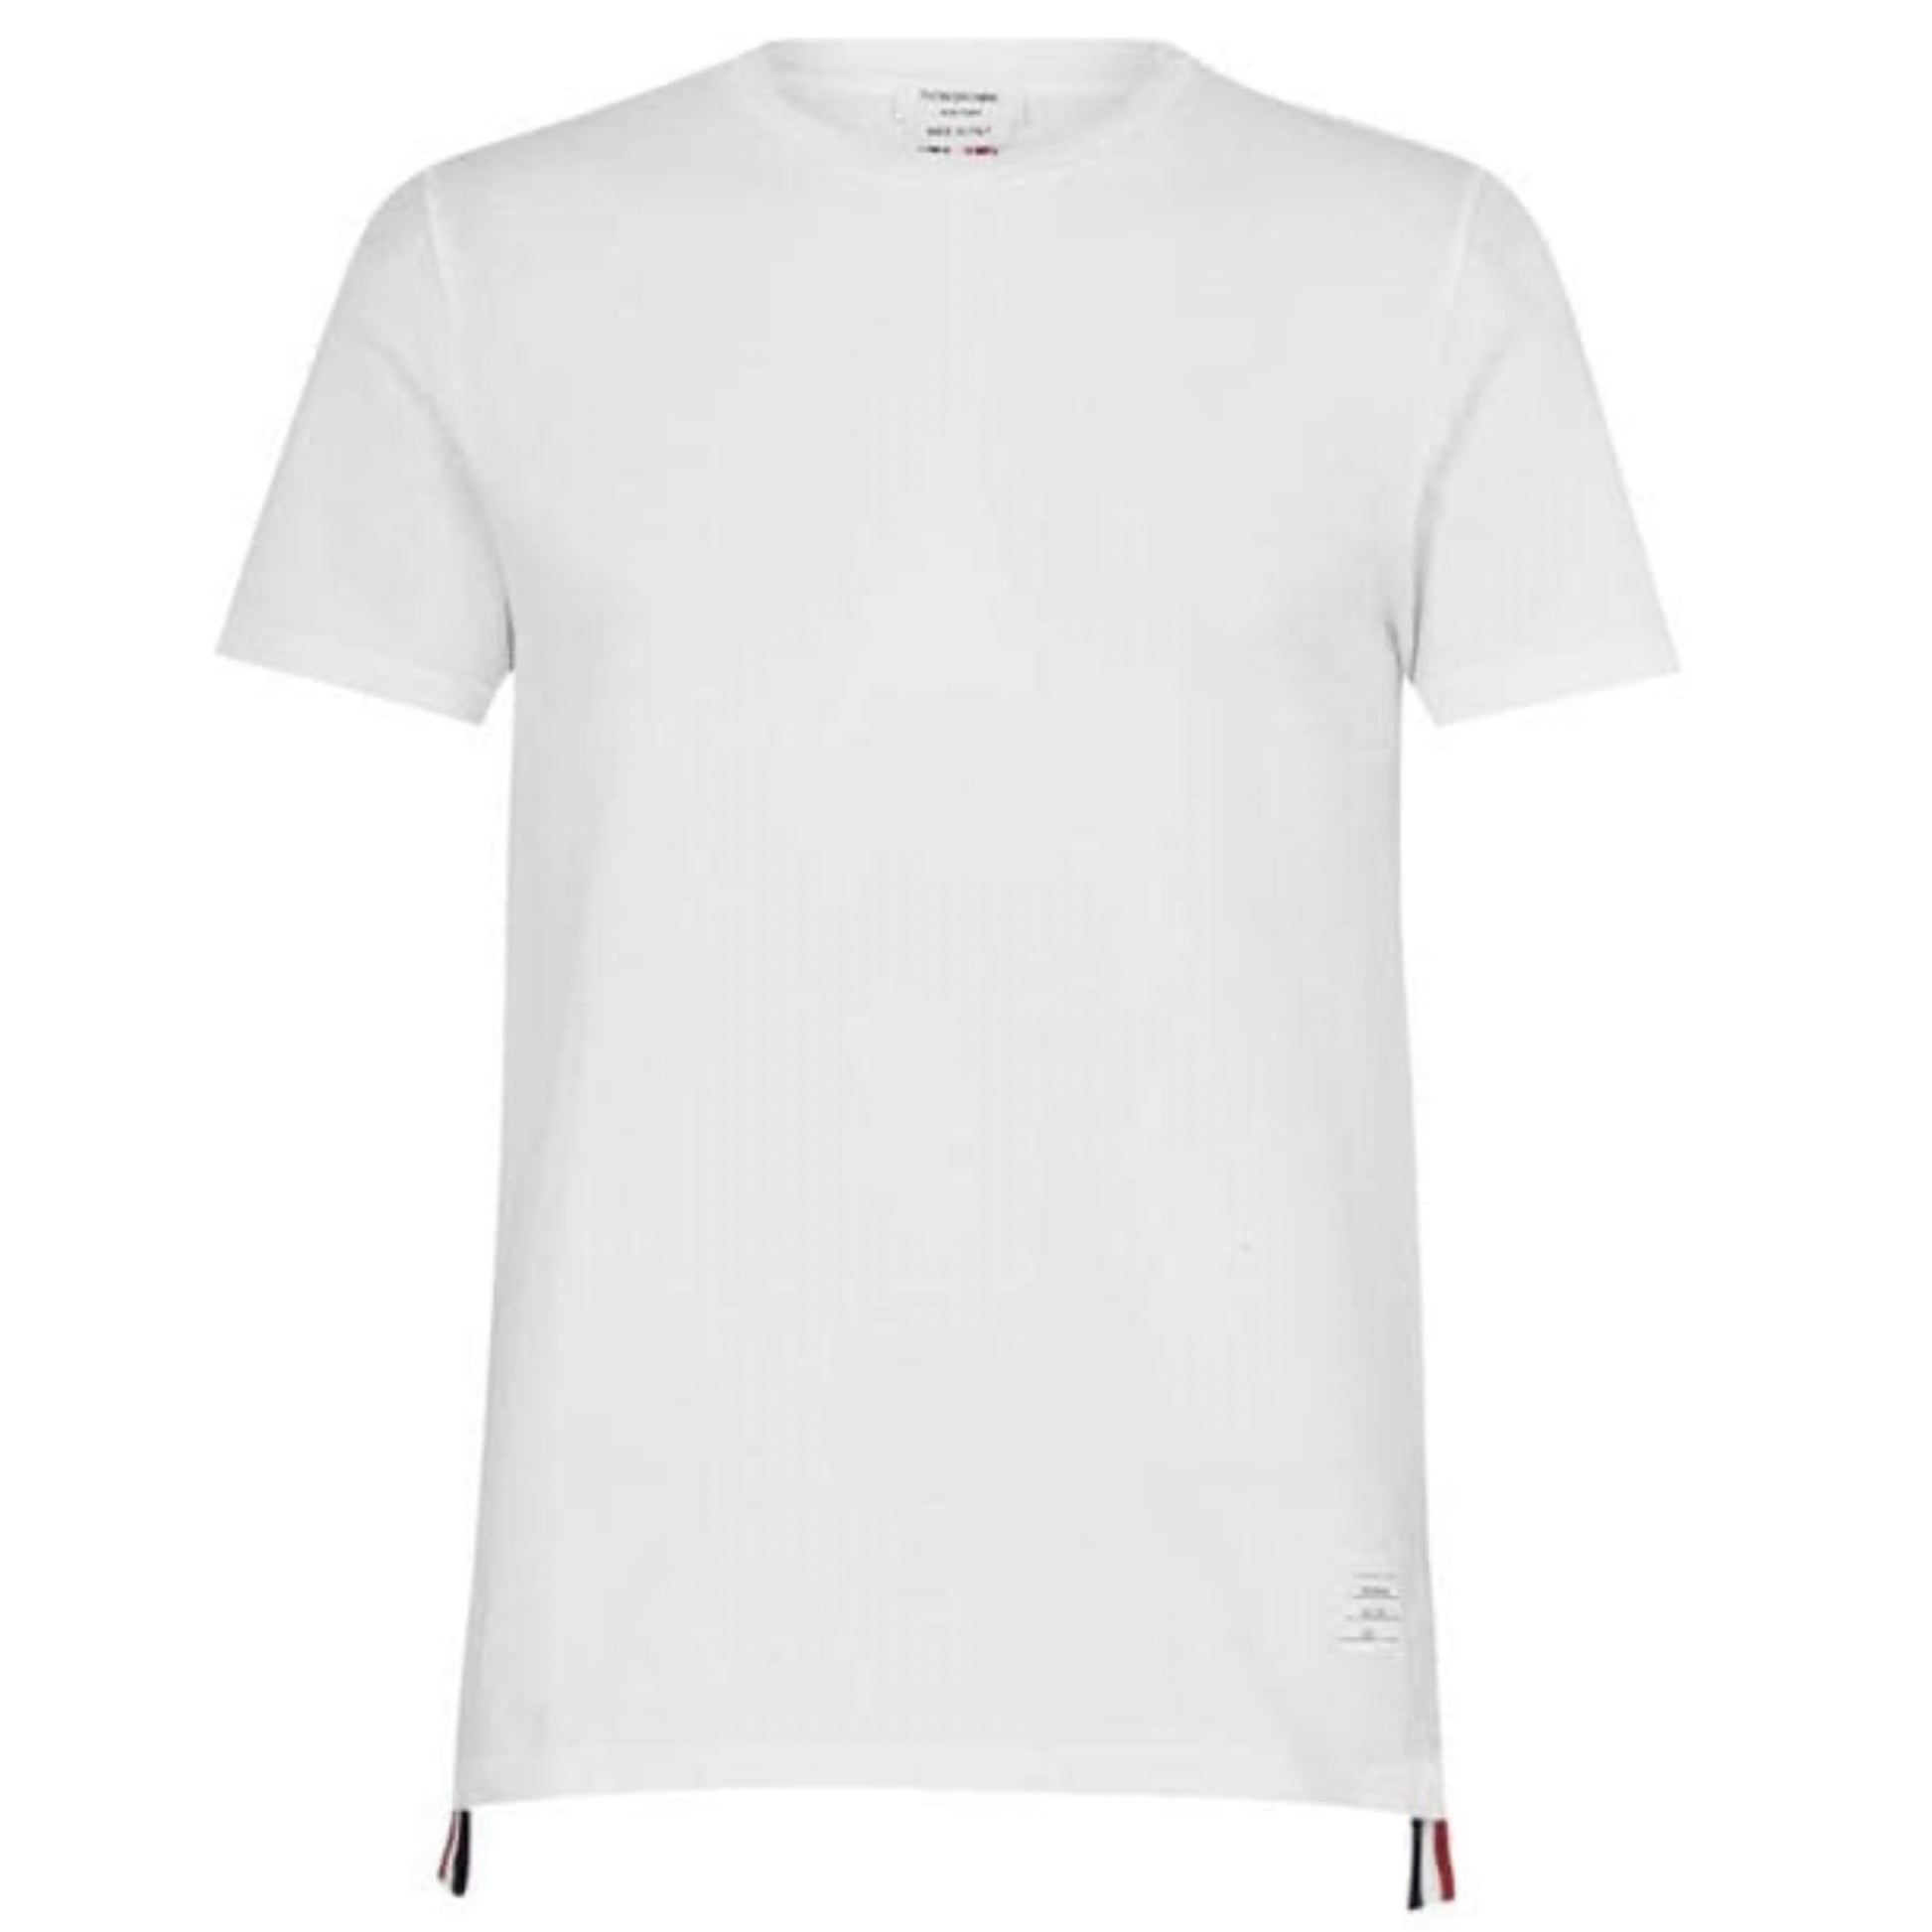 Thom Browne White Relaxed Fit T-Shirt T-Shirt Thom Browne 